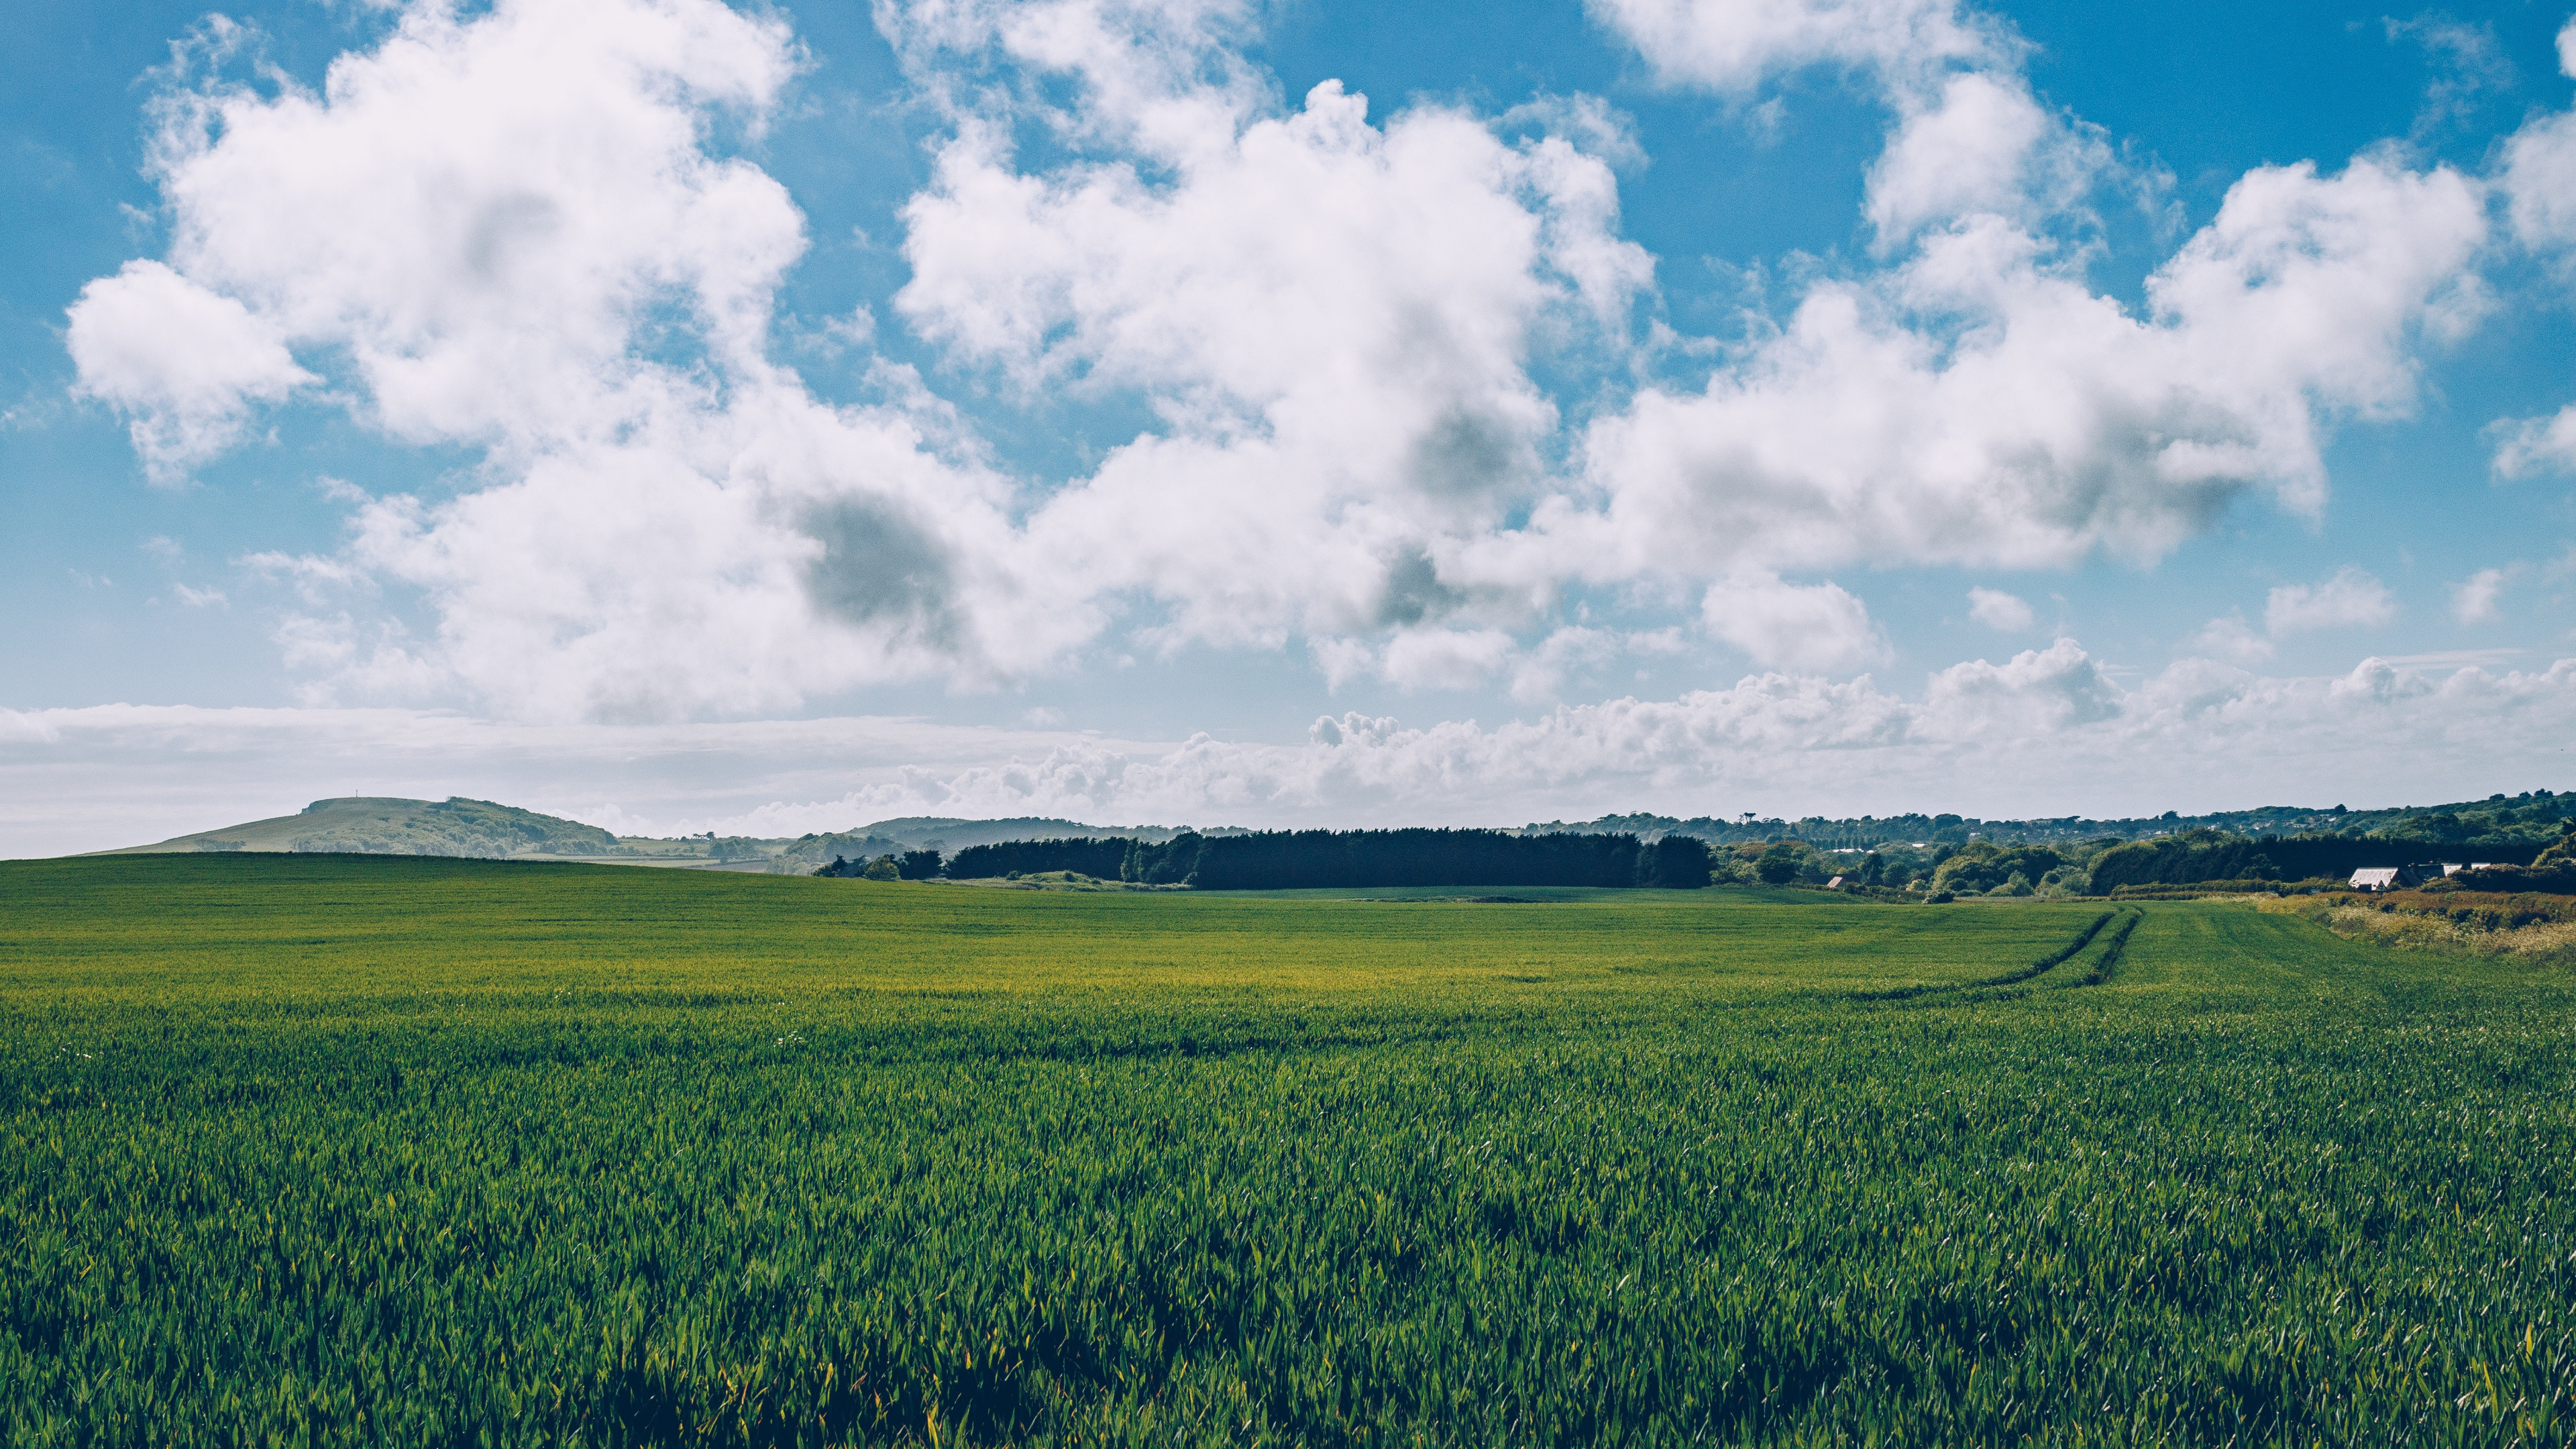 Grass and Sky: Green fields, Back roads, Clouds, Countryside, Environment, Land, Non-urban area. 3840x2160 4K Wallpaper.